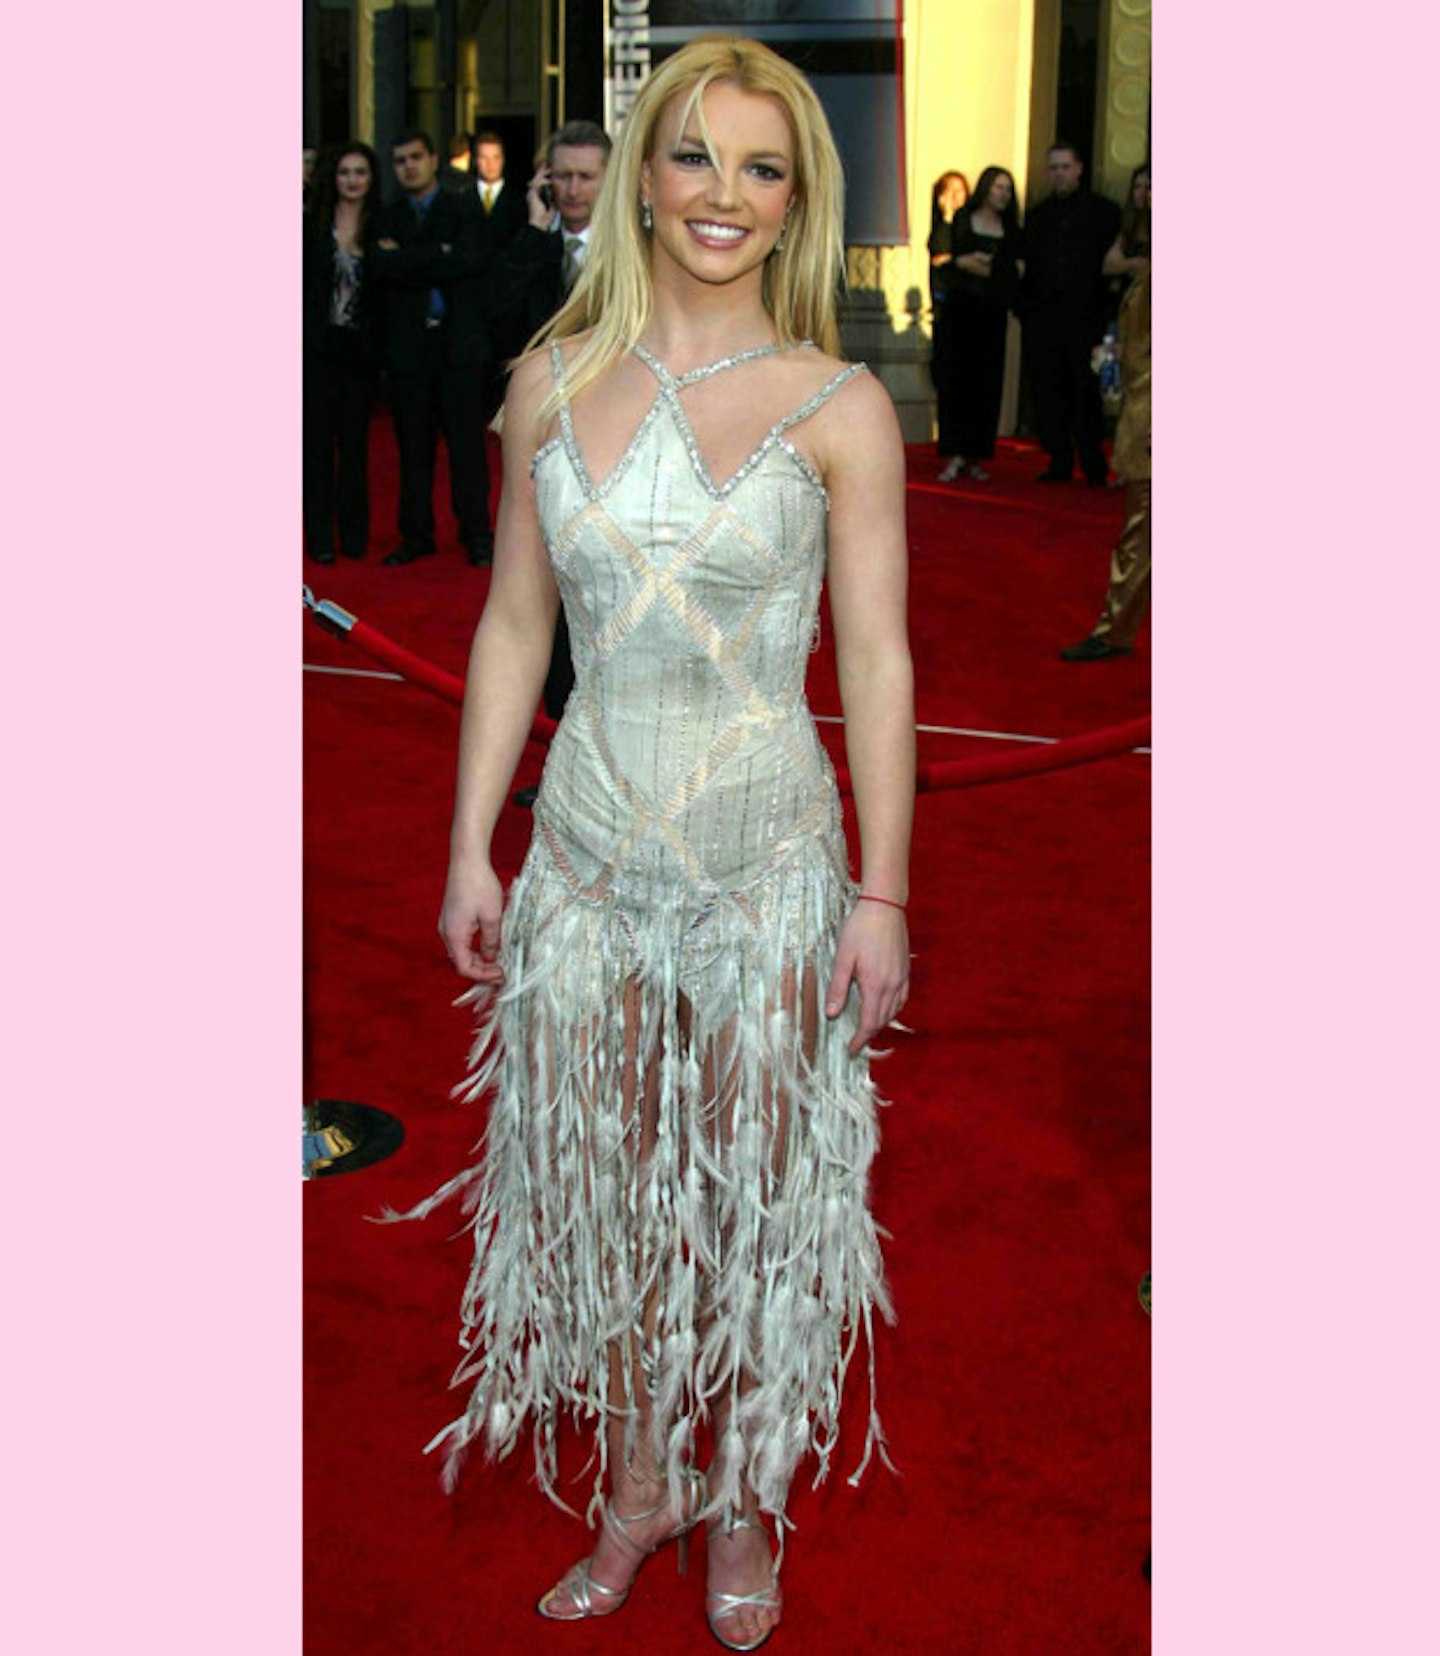 britney-spears-worst-outfits-feather-silver-dress